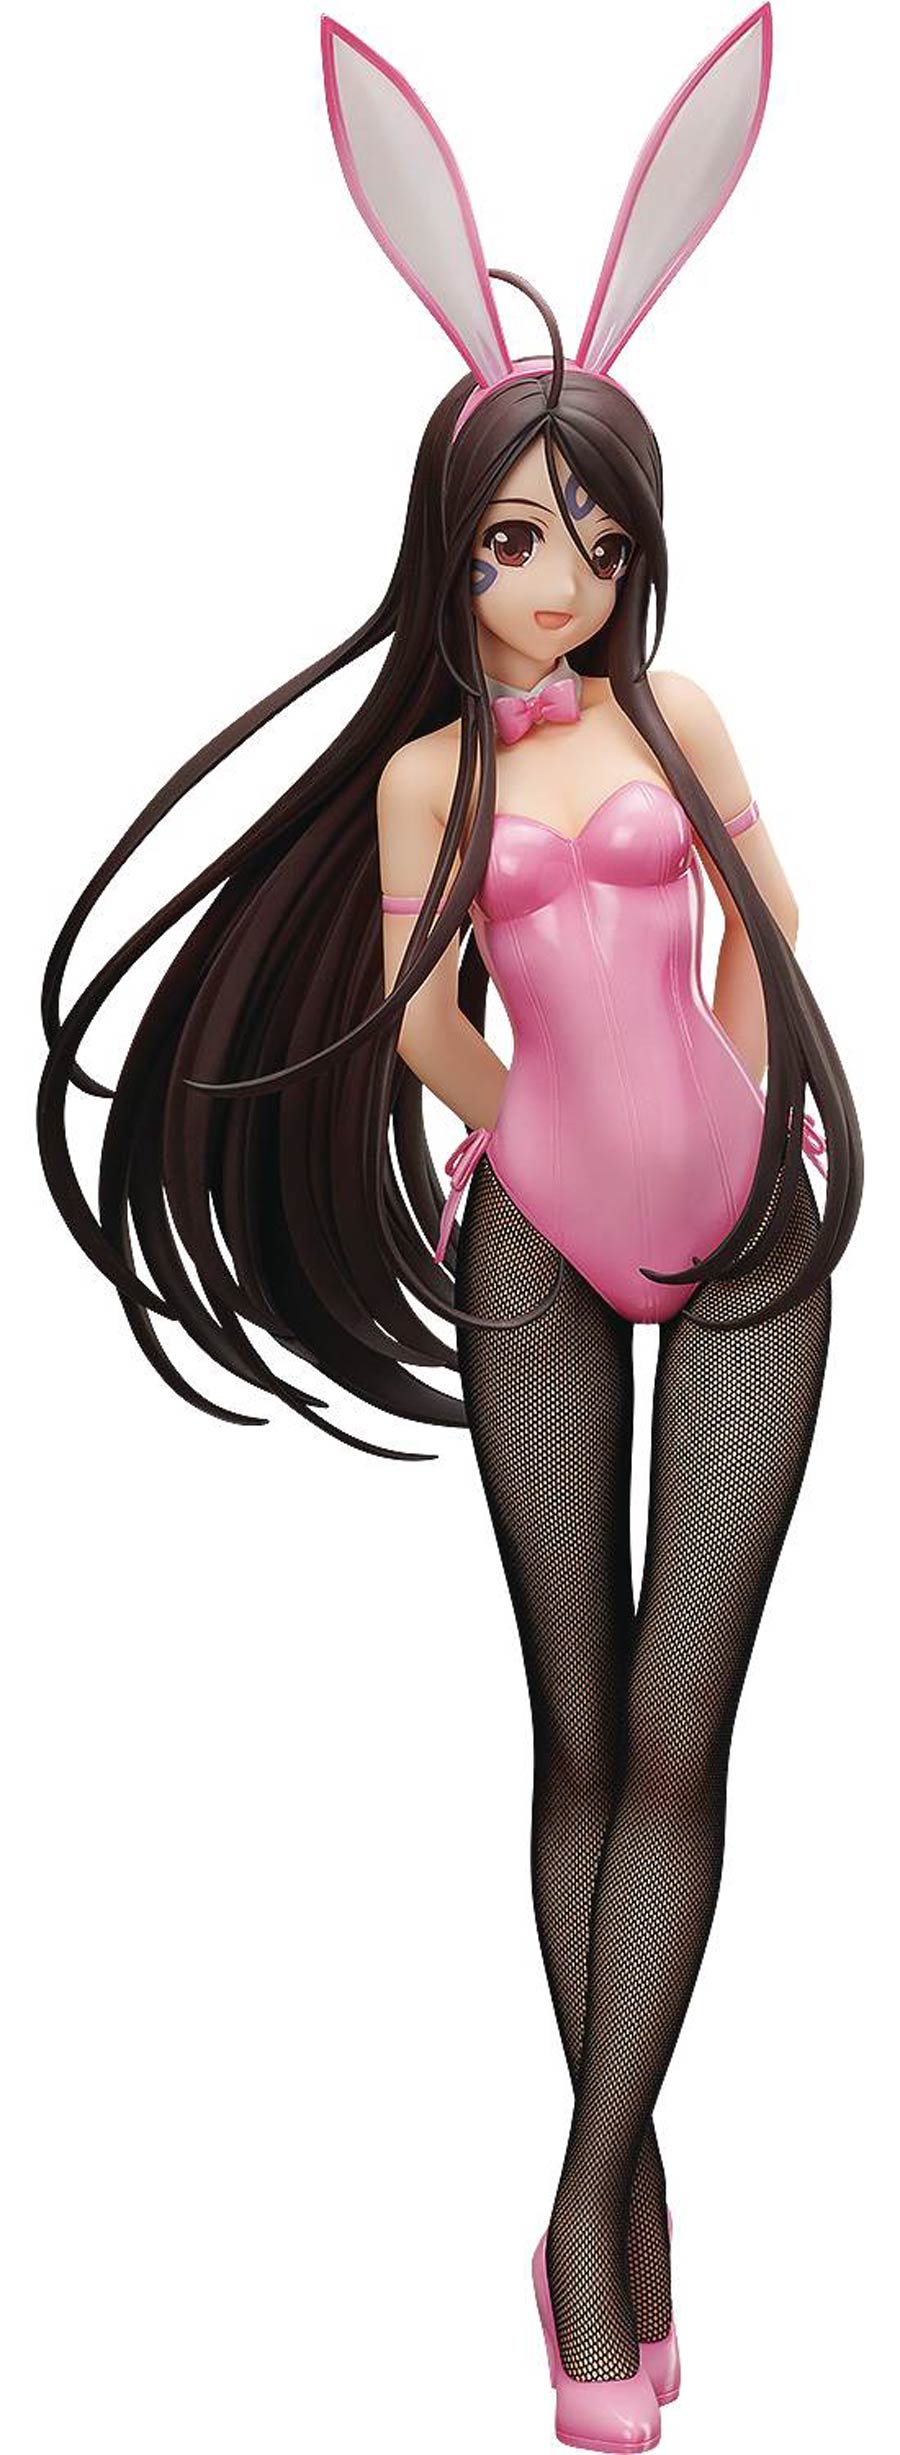 Oh My Goddess Skuld Bunny Outfit 1/4 Scale PVC Figure